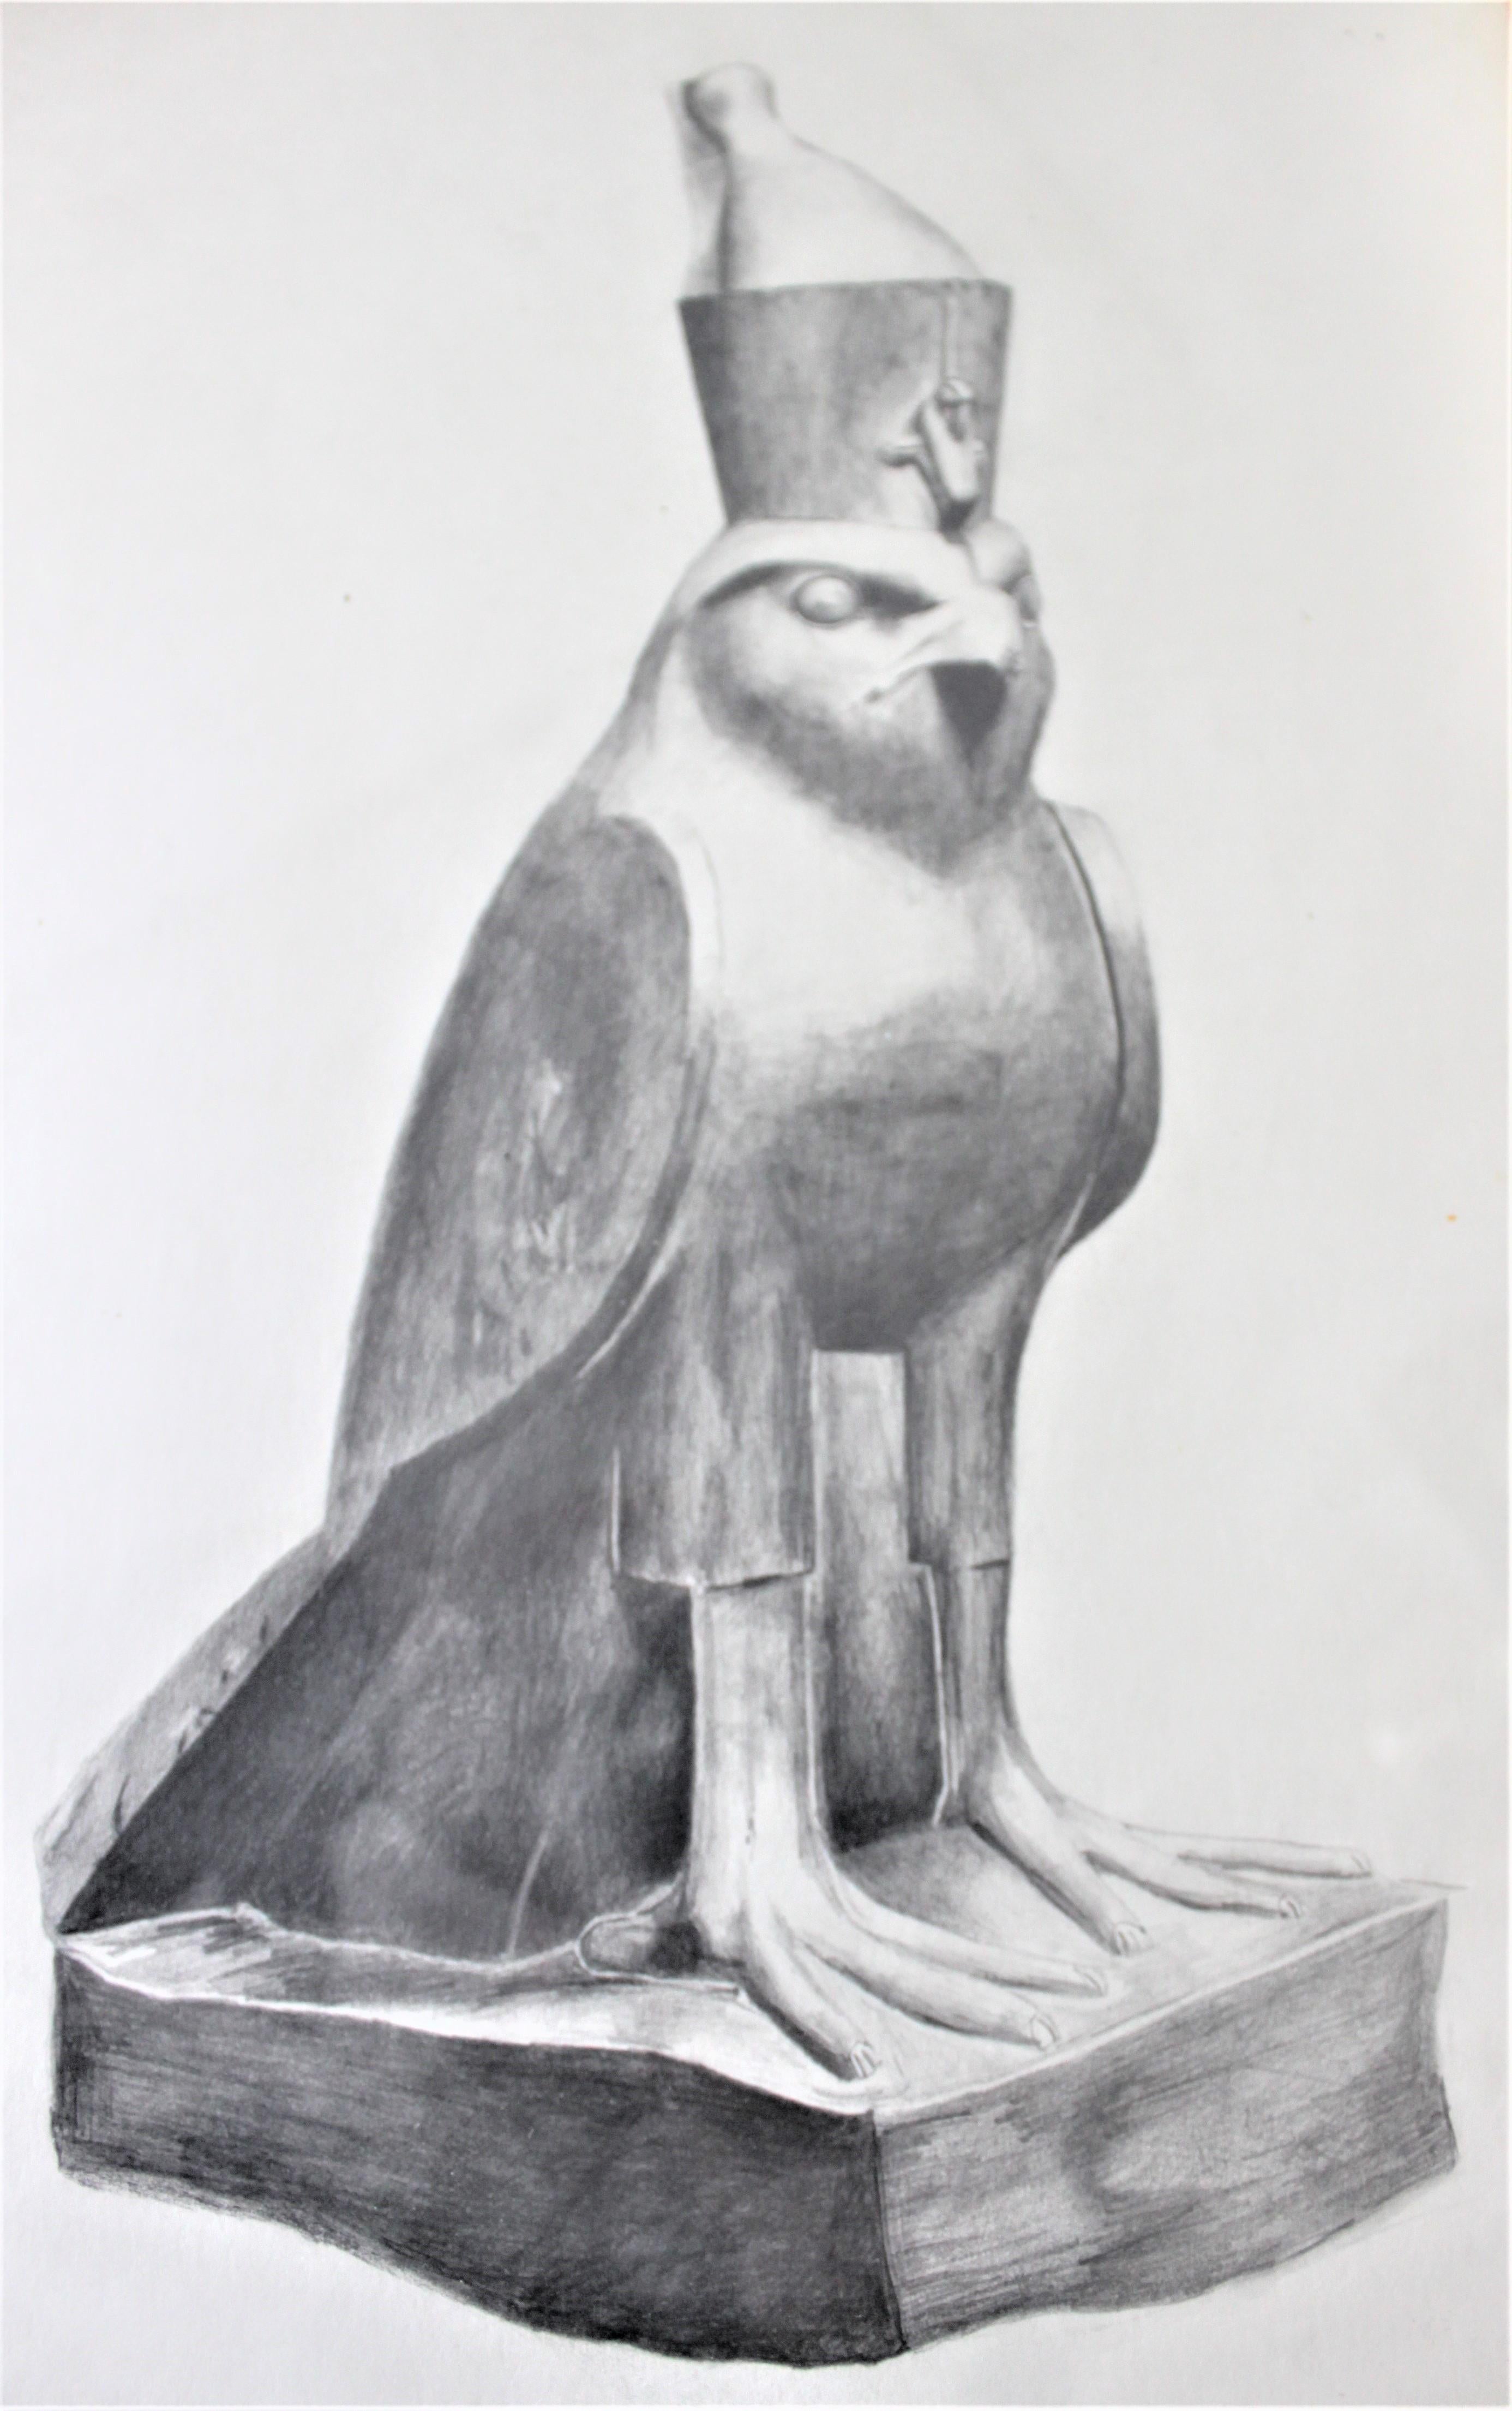 This framed pencil drawing was done by well known Canadian artist Edward J. Hughes in approximately 1975. The drawing is a very well executed depiction of the Ancient Egyptian diety, Horus. This original pencil drawing is very detailed and is